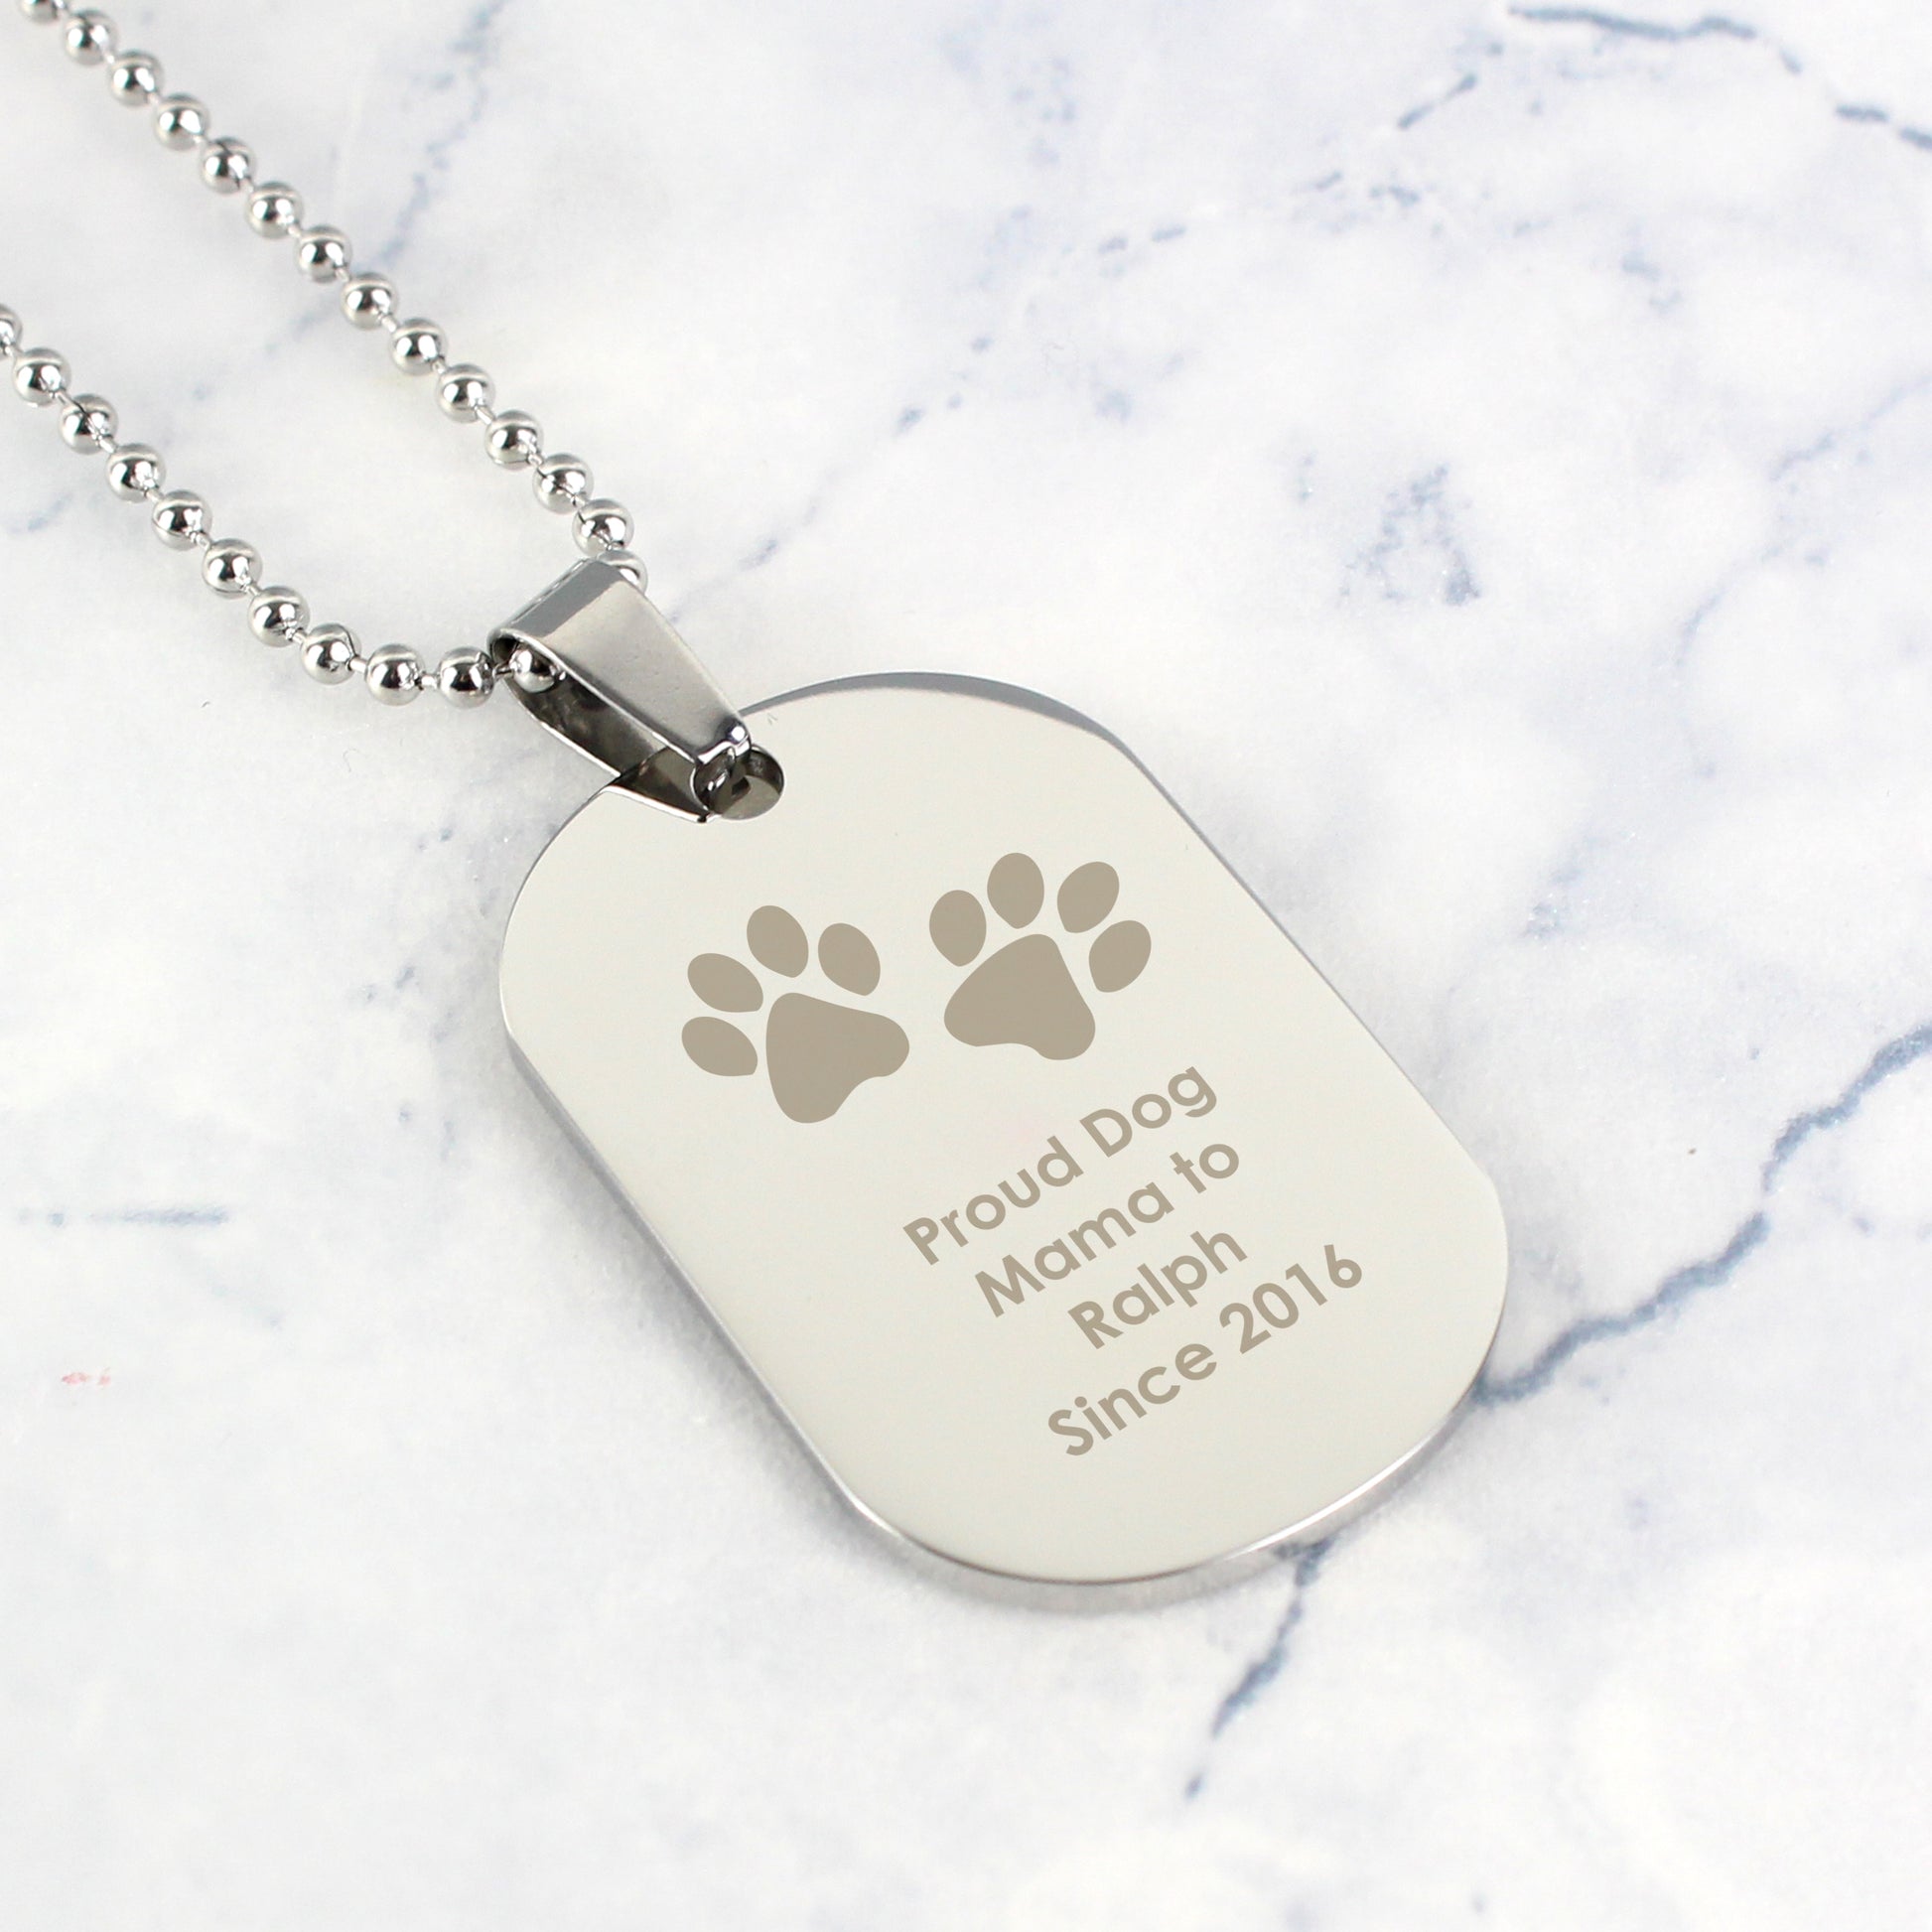 Personalised Paw Prints Dog Tag Necklace - Violet Belle Gifts - Personalised Paws Dog Tag Necklace